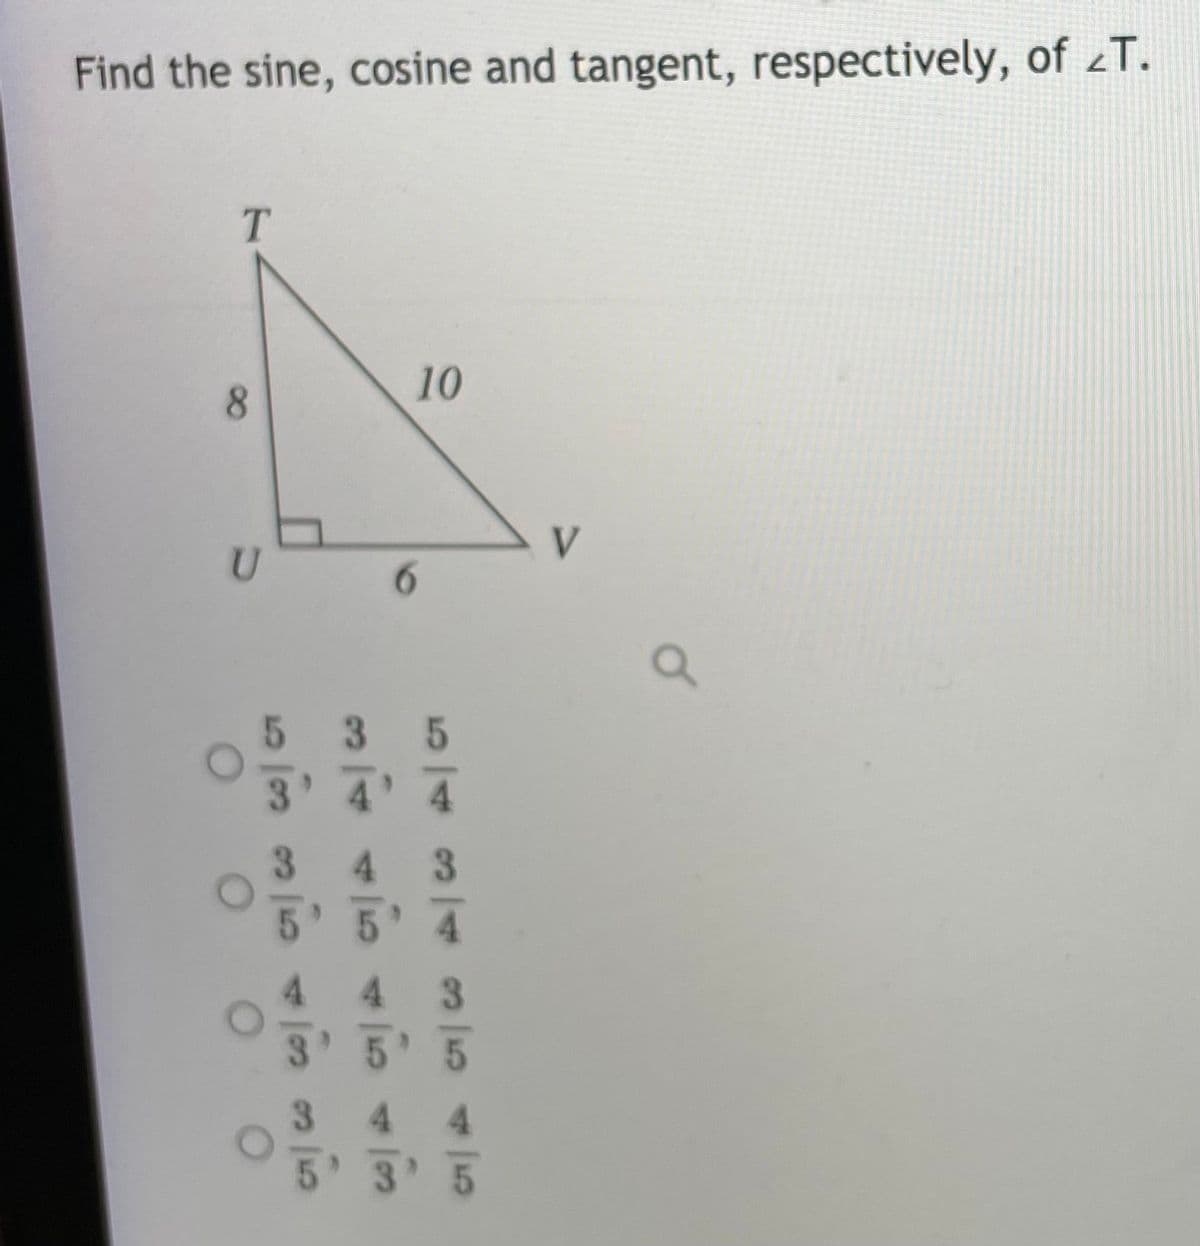 Find the sine, cosine and tangent, respectively, of zT.
10
8.
35
3 4' 4
4 3
.
3 5' 5
4 4
3.
5 3 5
